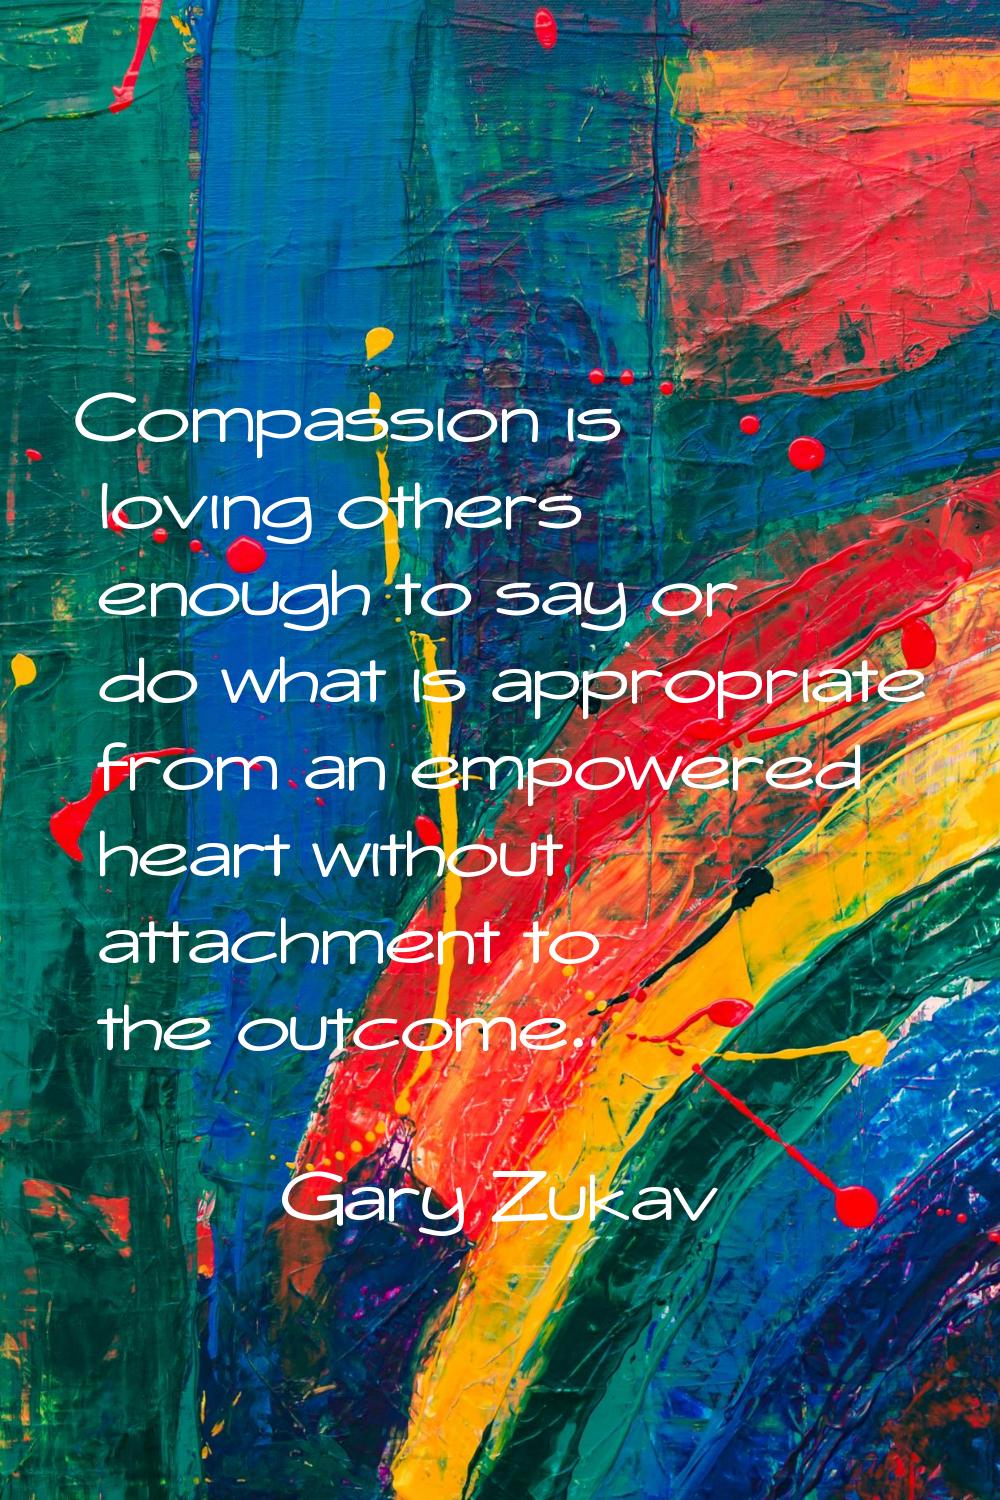 Compassion is loving others enough to say or do what is appropriate from an empowered heart without